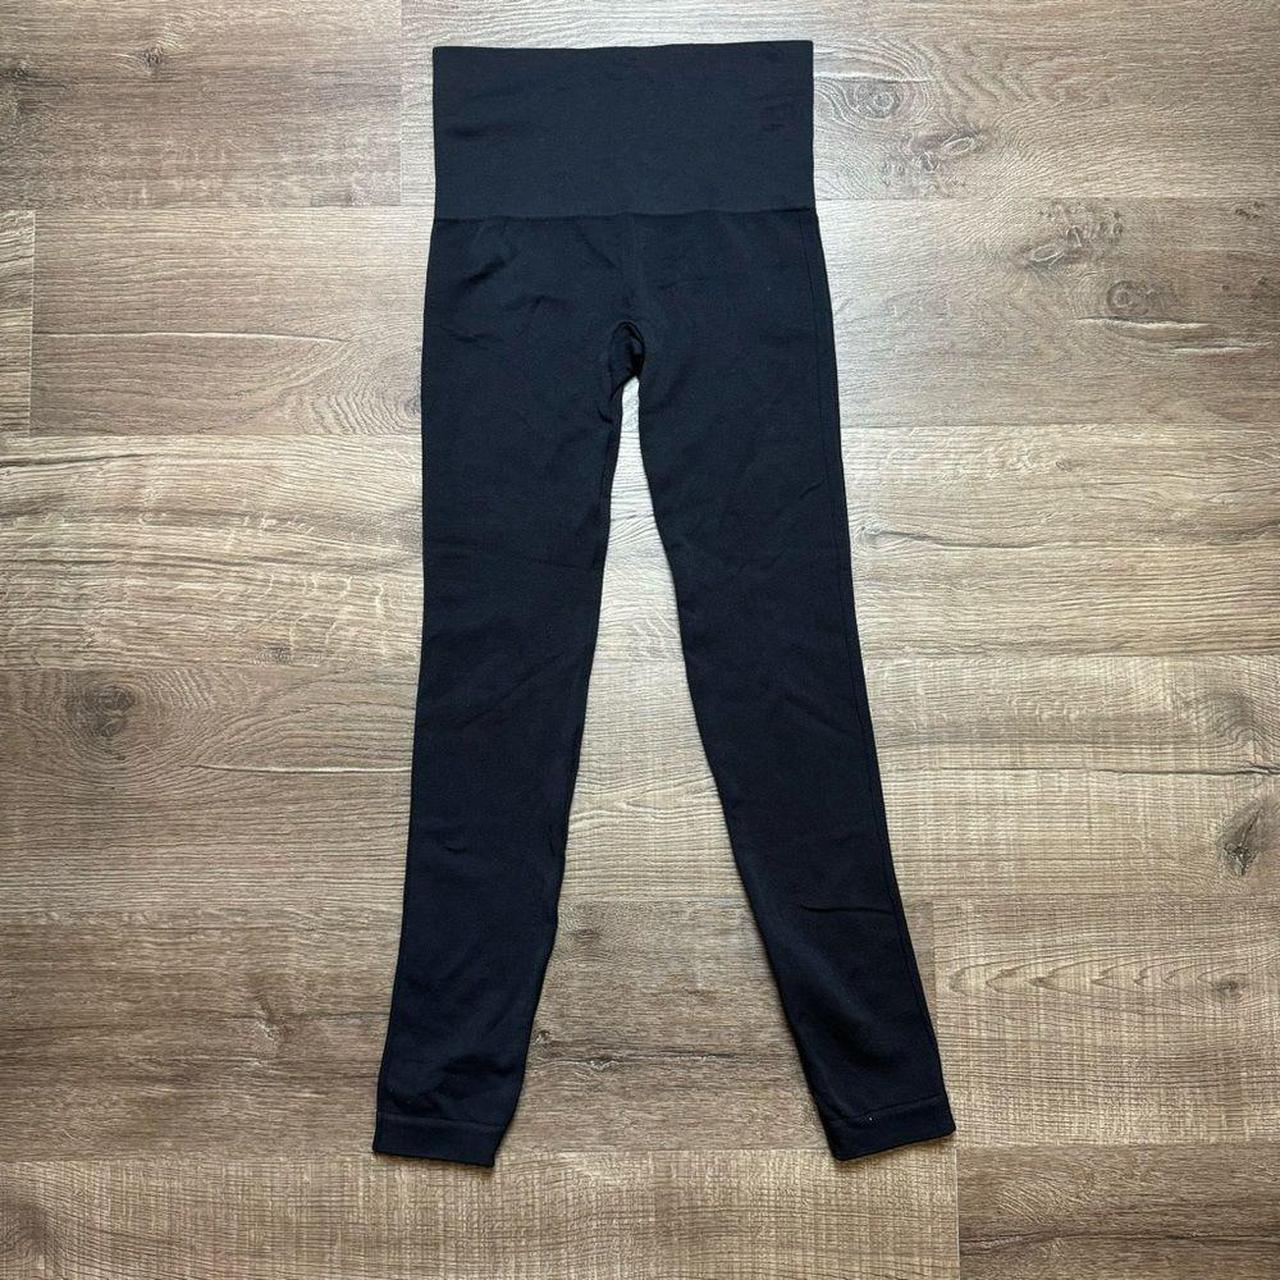 Spanx Look At Me Now Leggings Seamless Shaping High - Depop